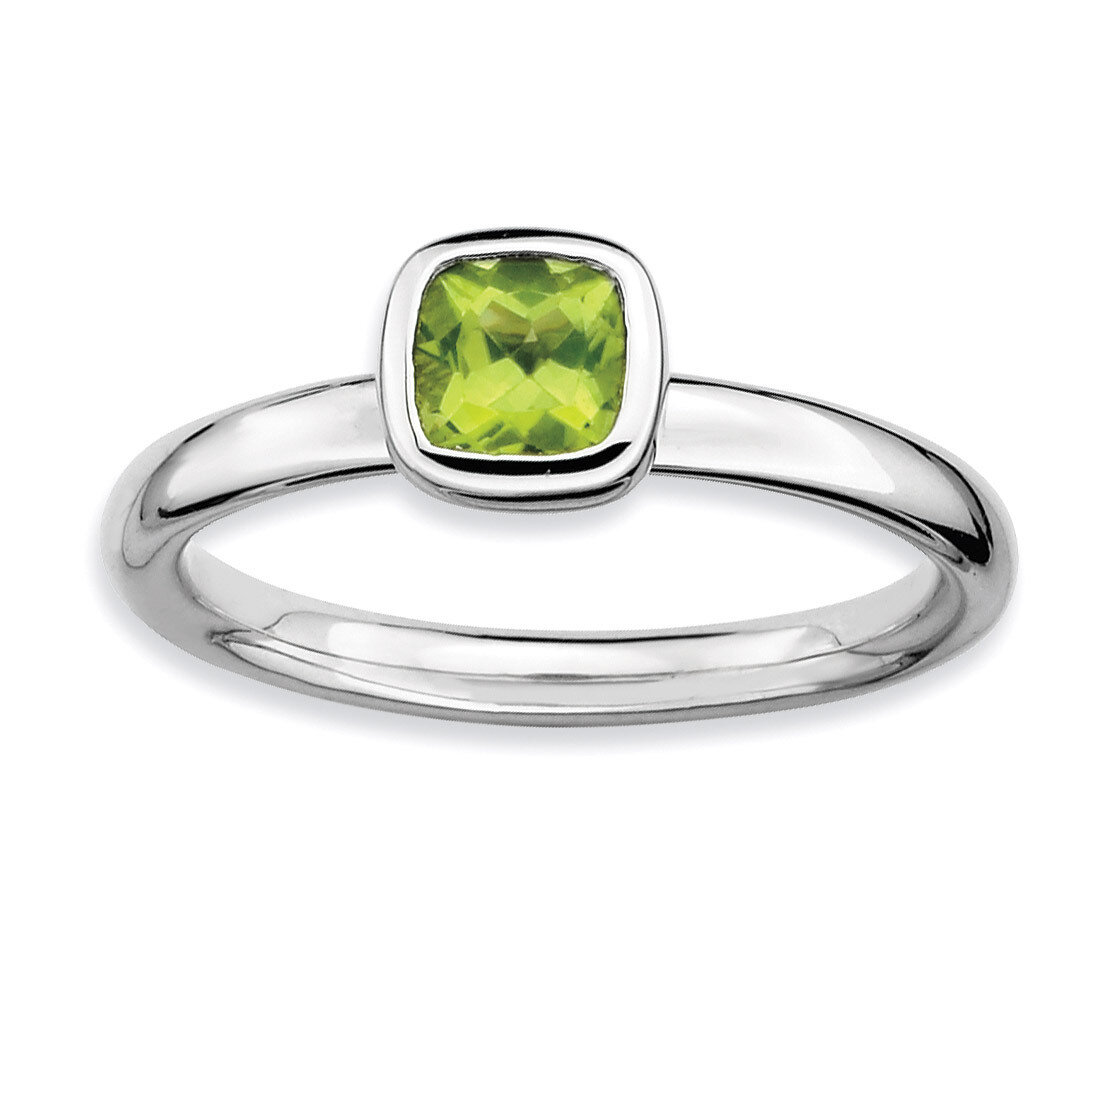 Stackable Expressions Cushion Cut Peridot Ring Sterling Silver QSK453-10